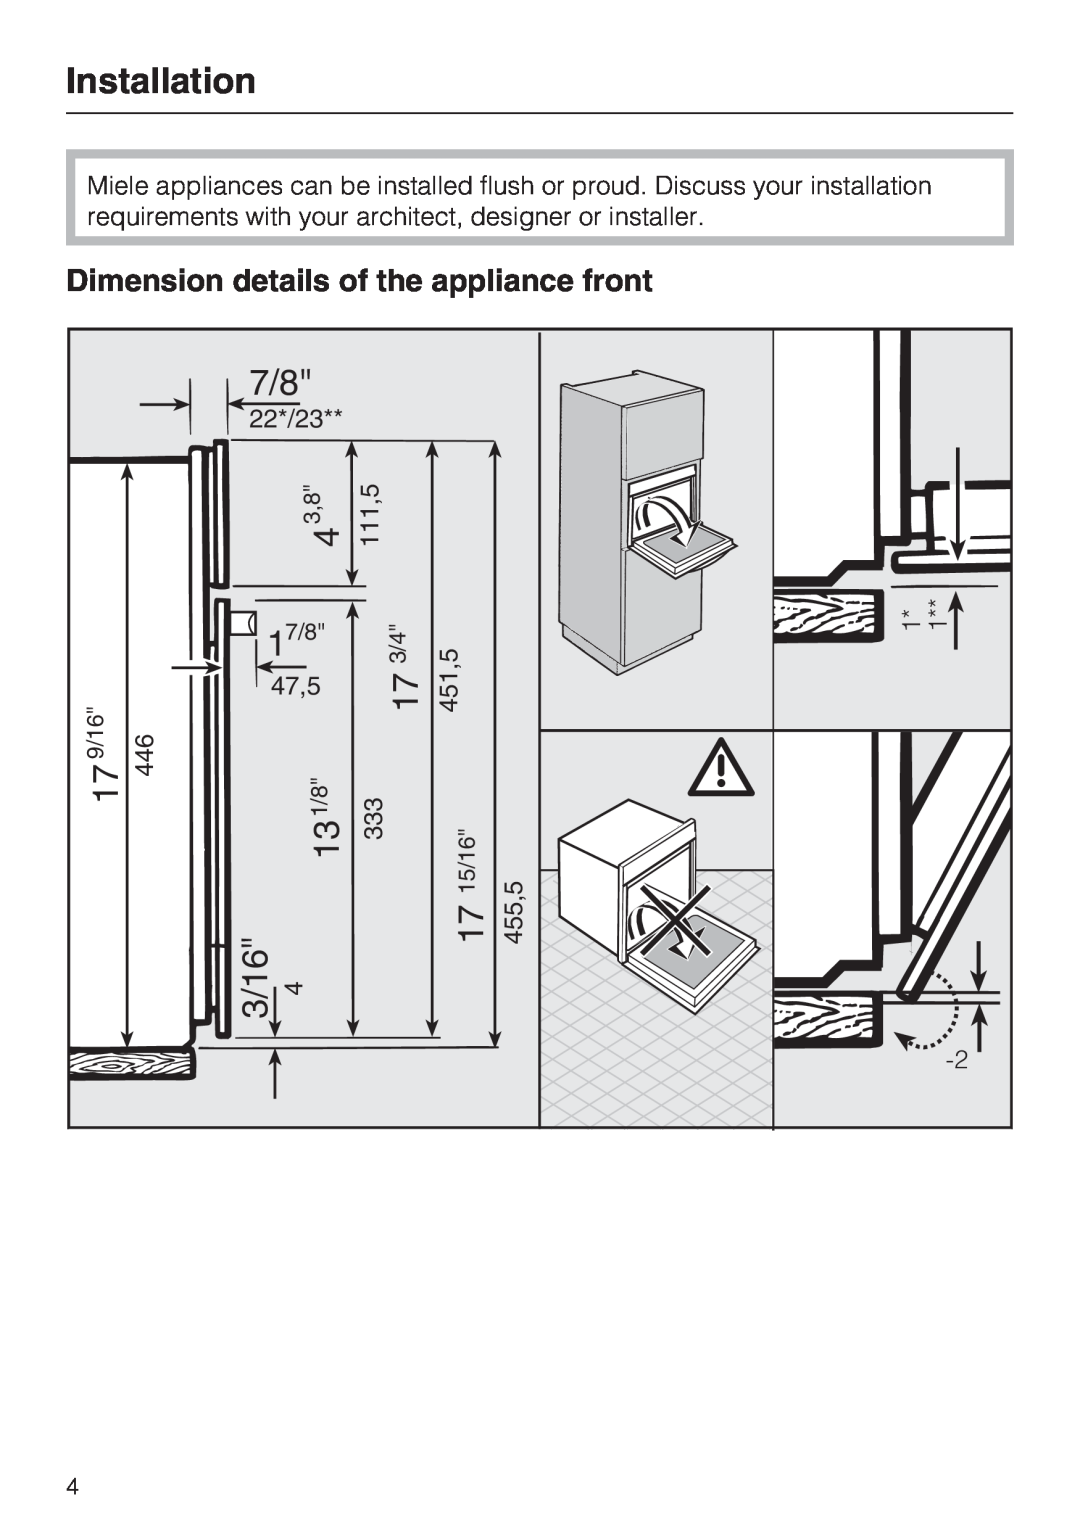 Miele DGC 4084 XL, DGC 4086 XL installation instructions Installation, 3/16, Dimension details of the appliance front 